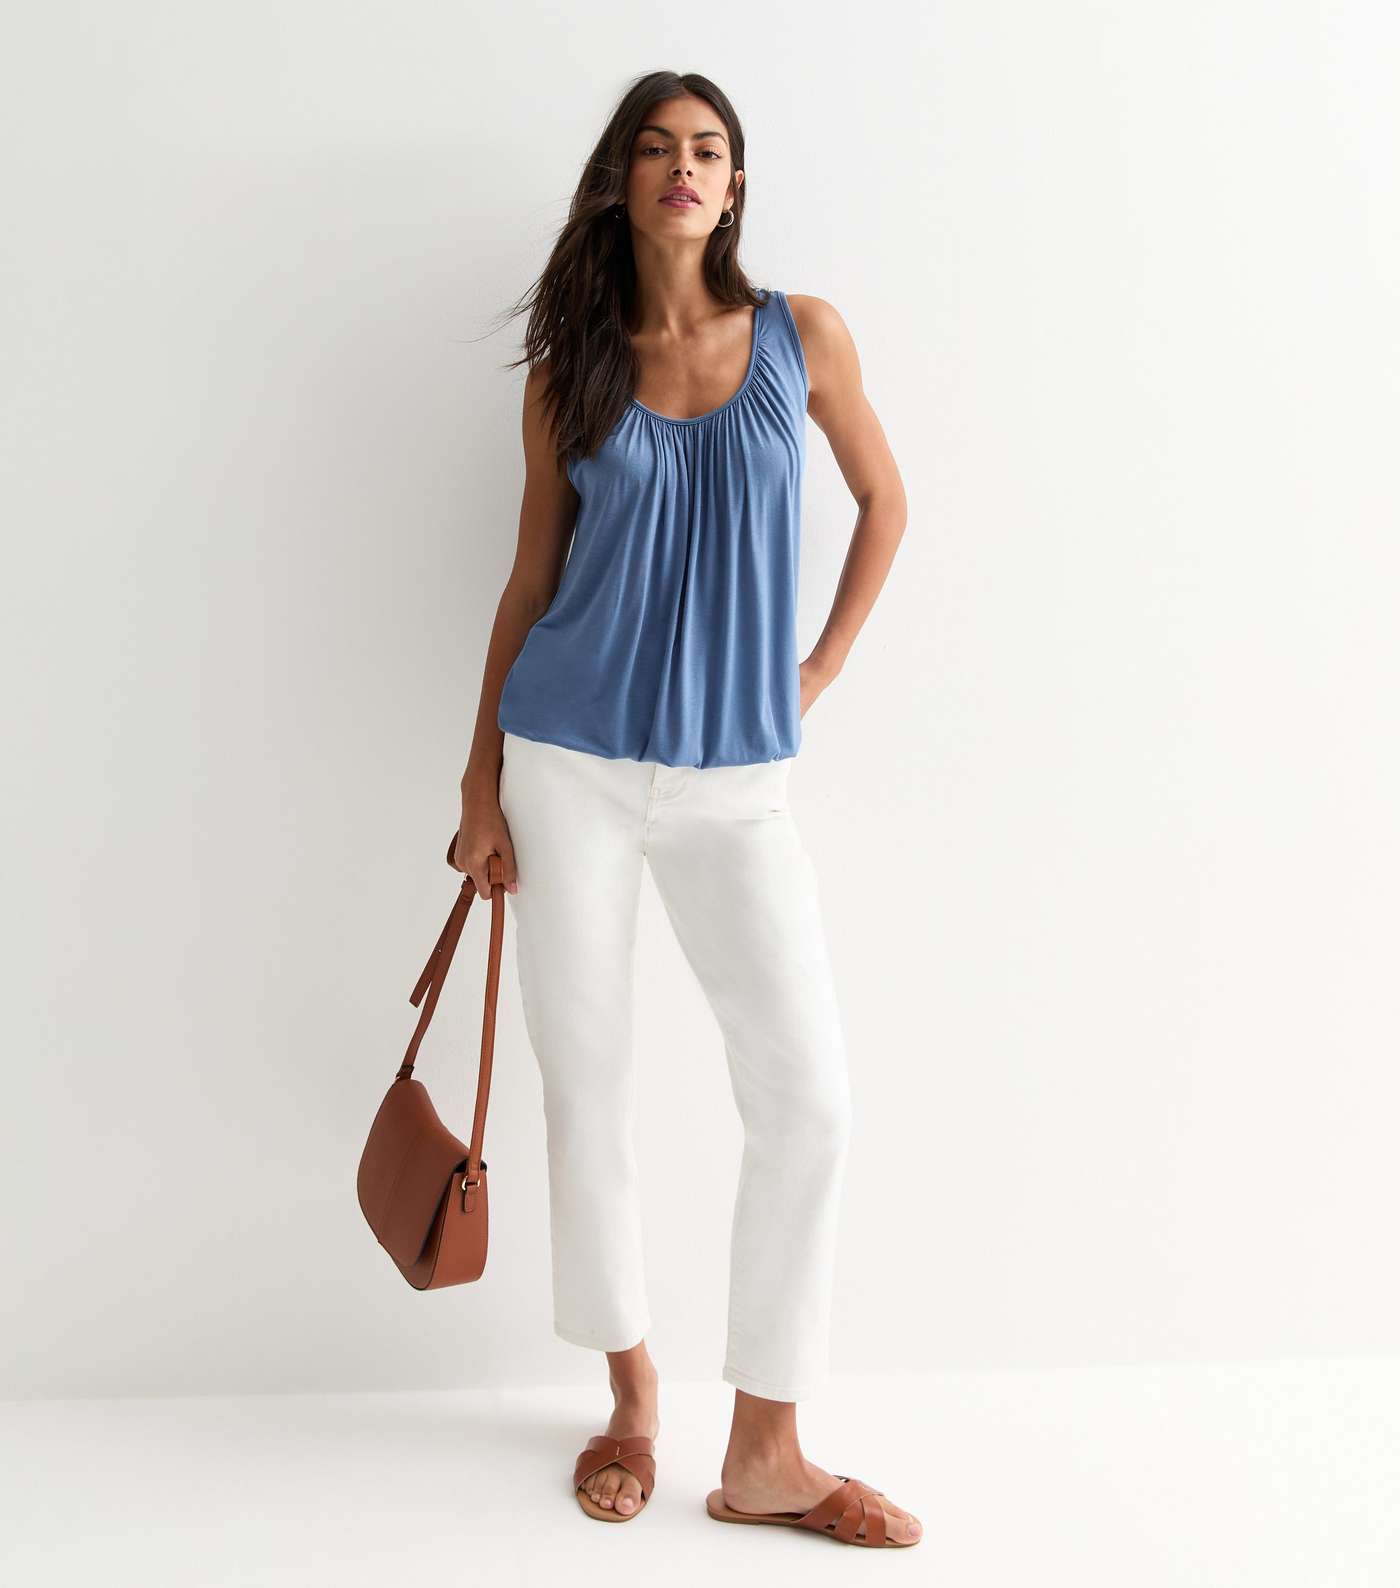 Gini London Pale Blue Oversized Top Image 3